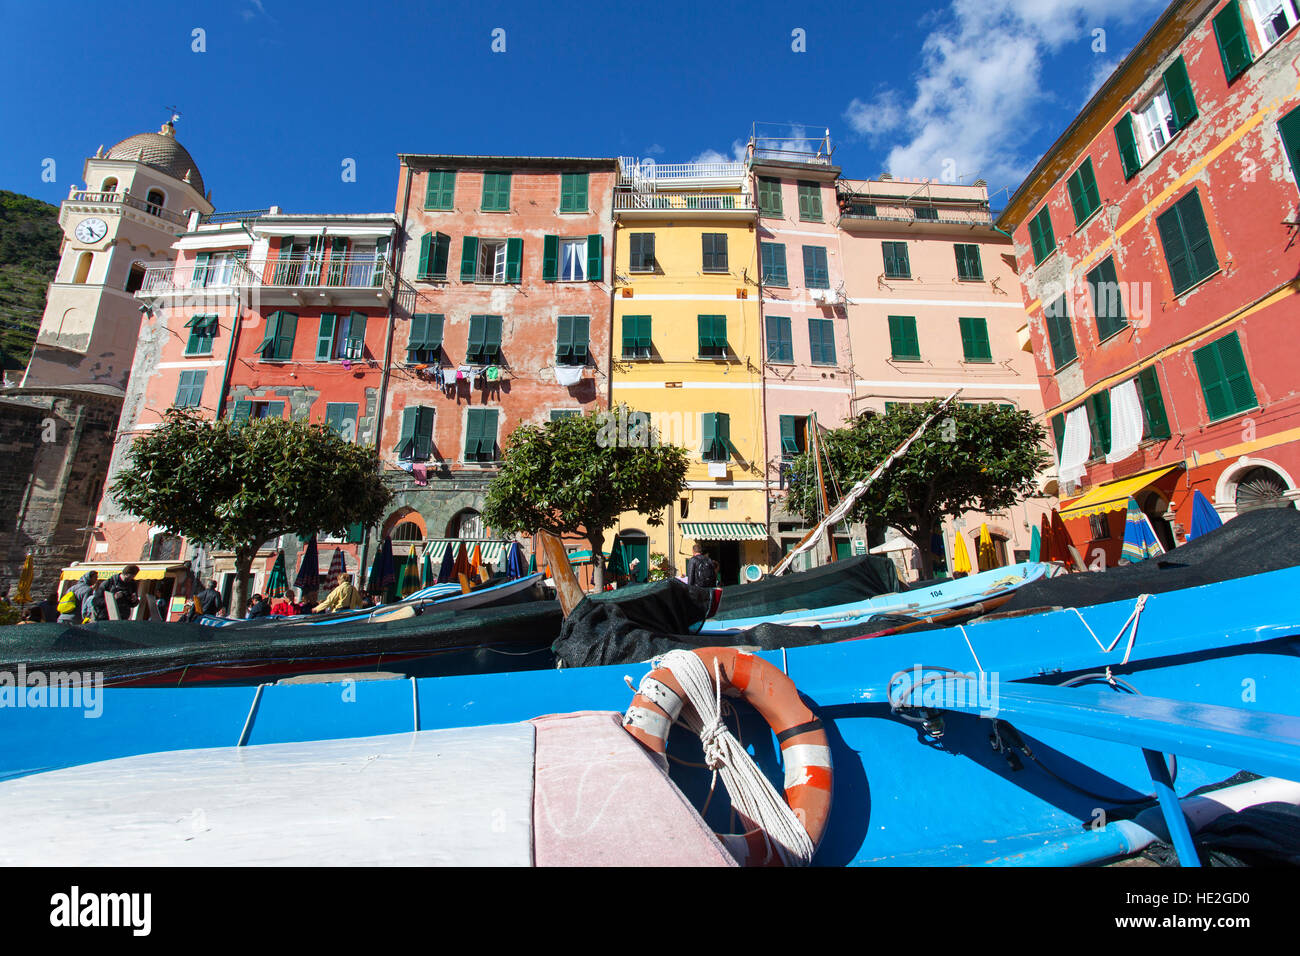 The picturesque town of Vernazza. Cinque Terre, Liguria, Italy. Stock Photo